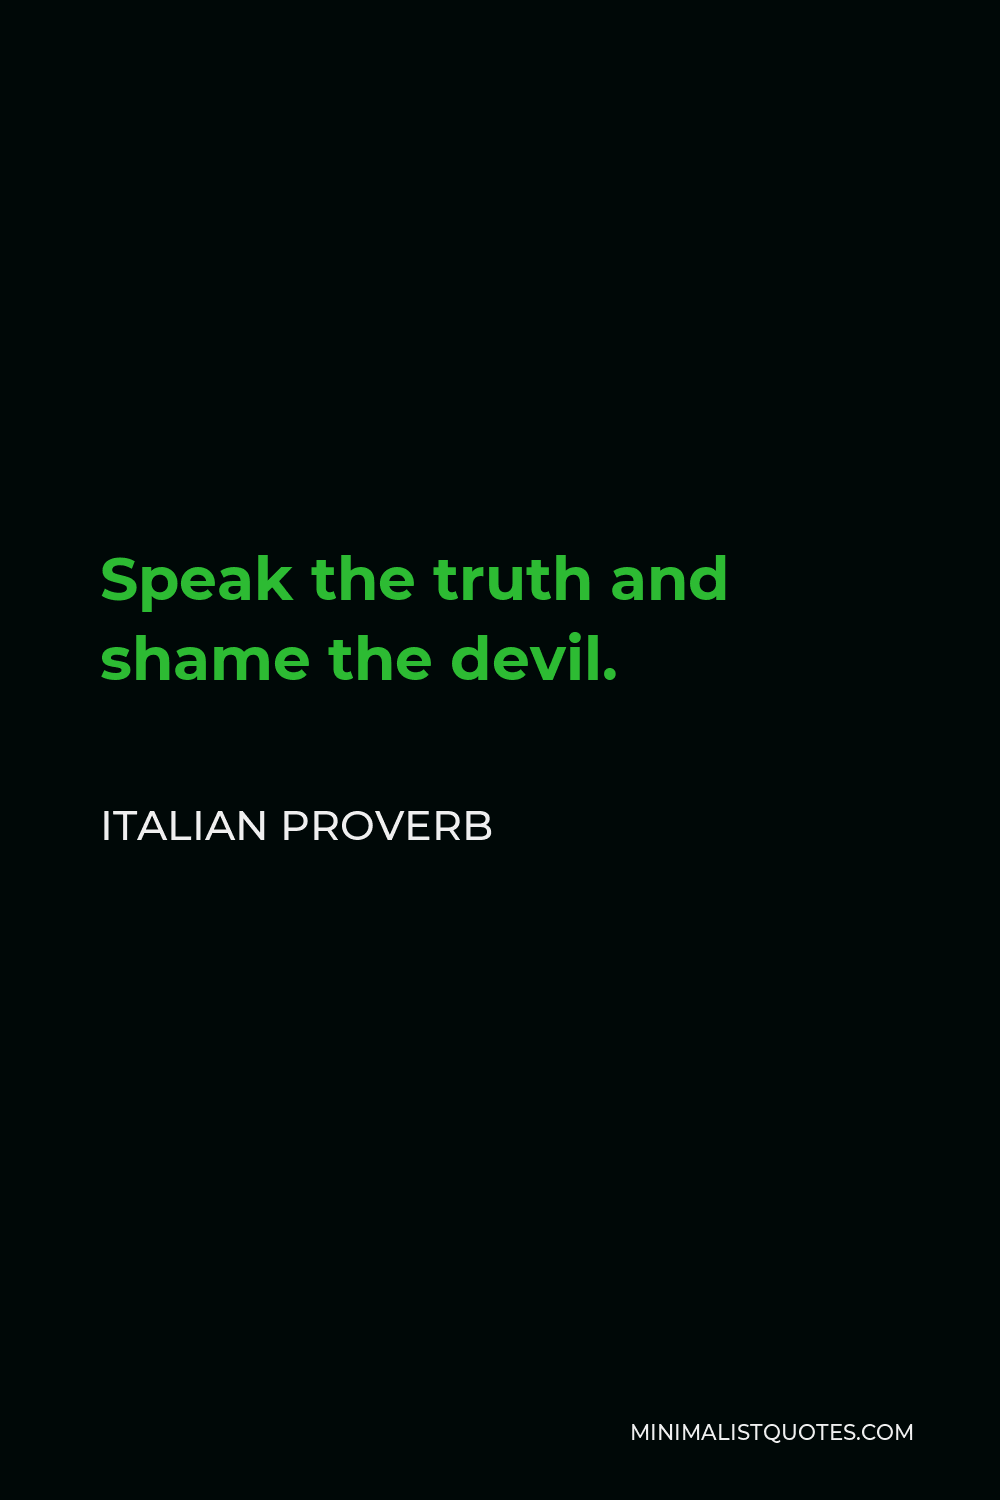 Italian Proverb Quote - Speak the truth and shame the devil.